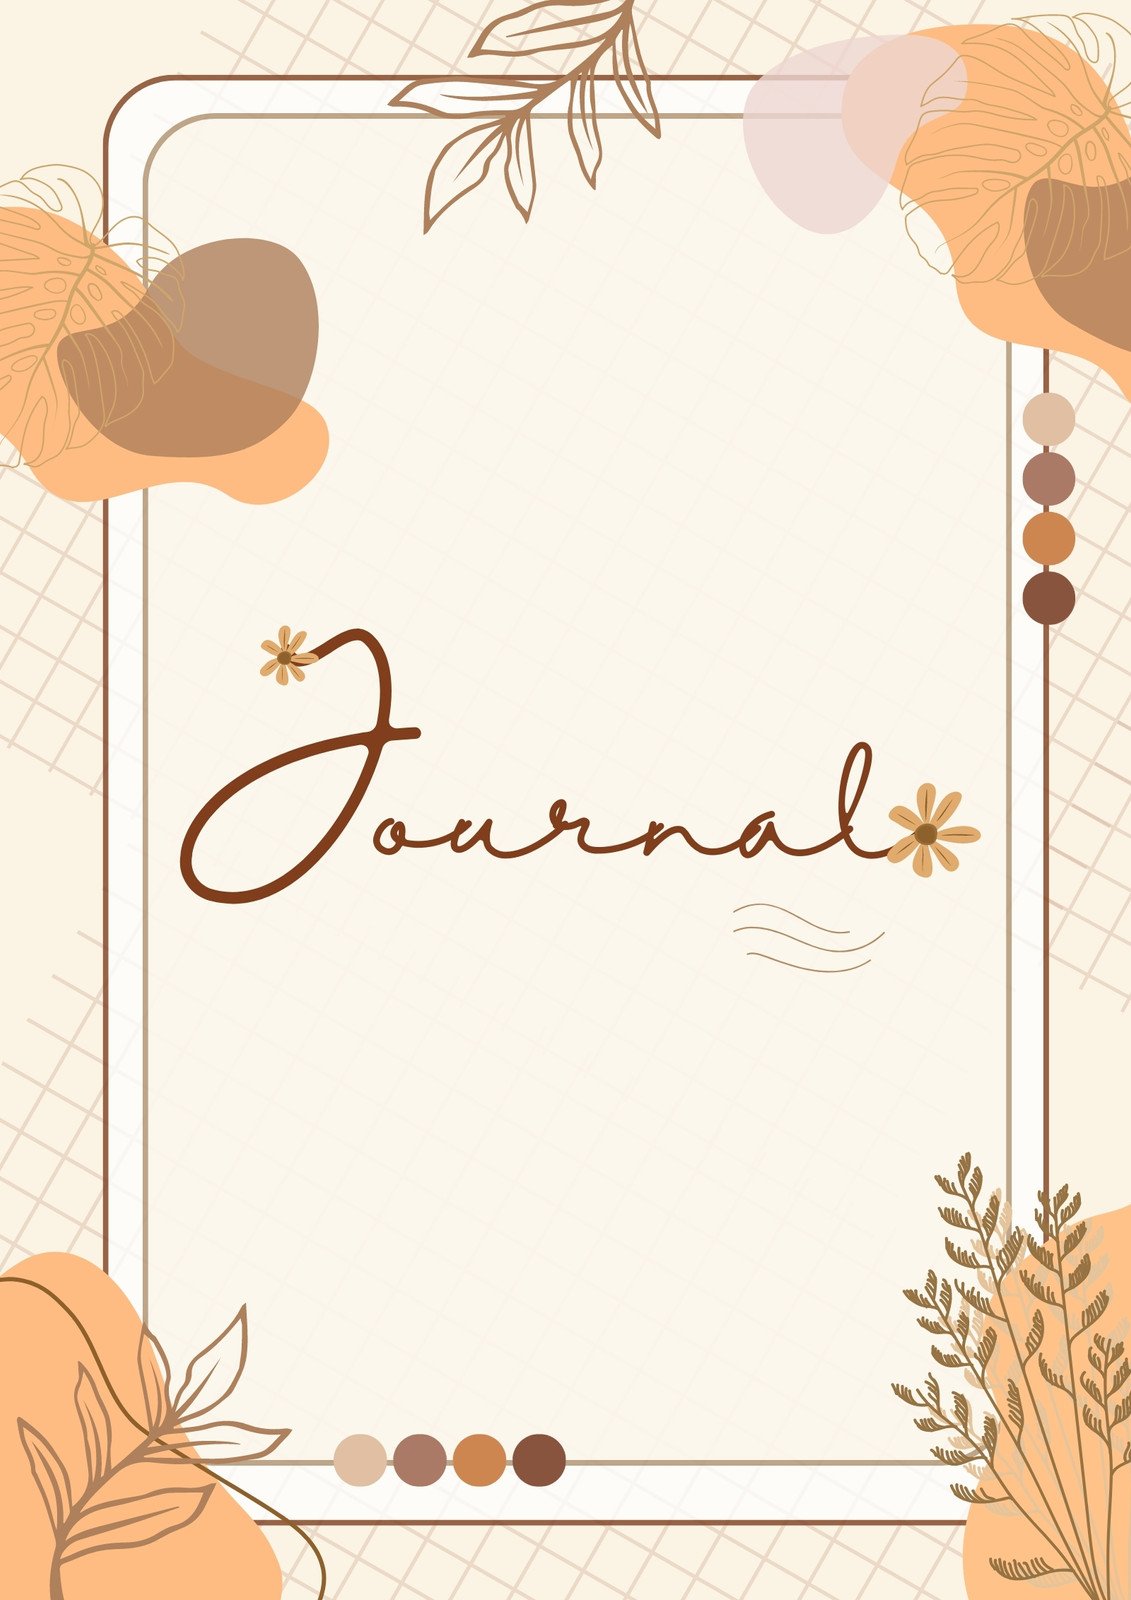 Free printable cover page templates you can customize | Canva